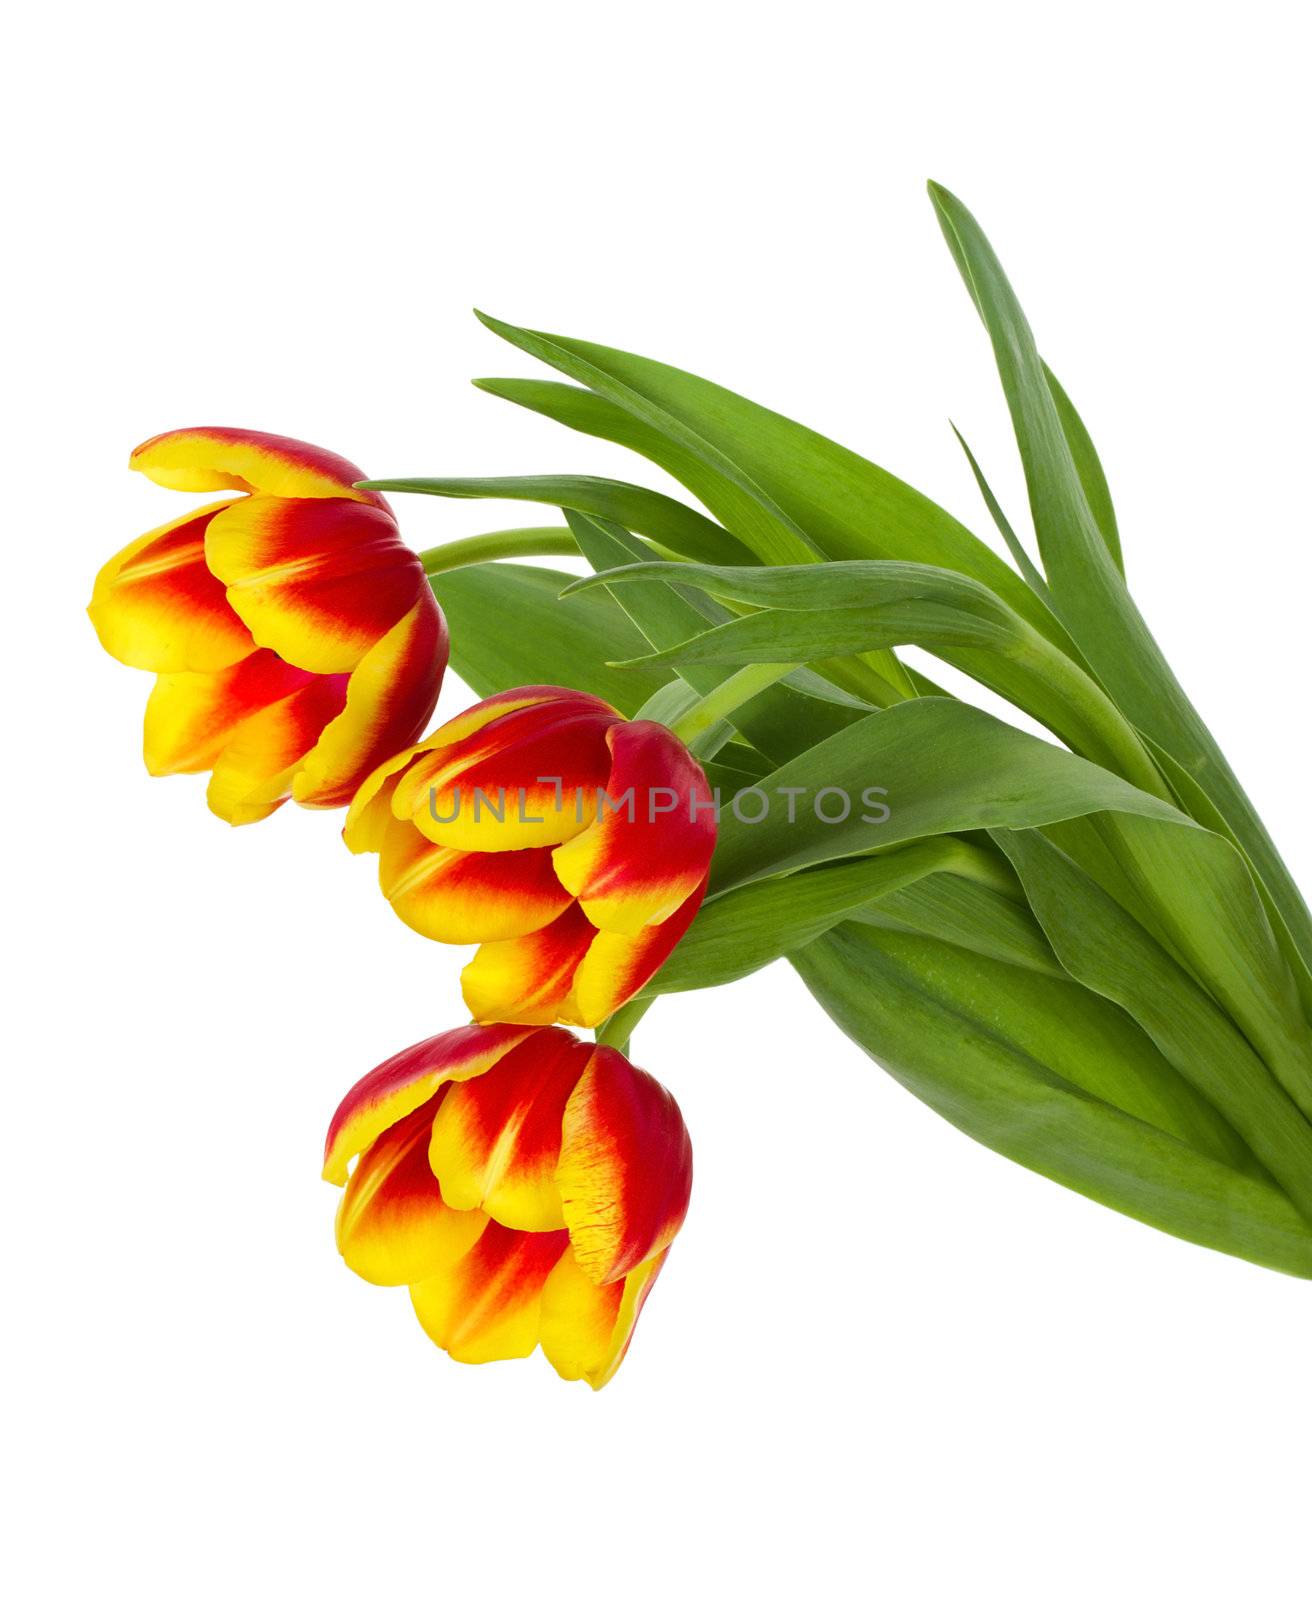 close-up red-yellow tulips bouquet, isolated on white